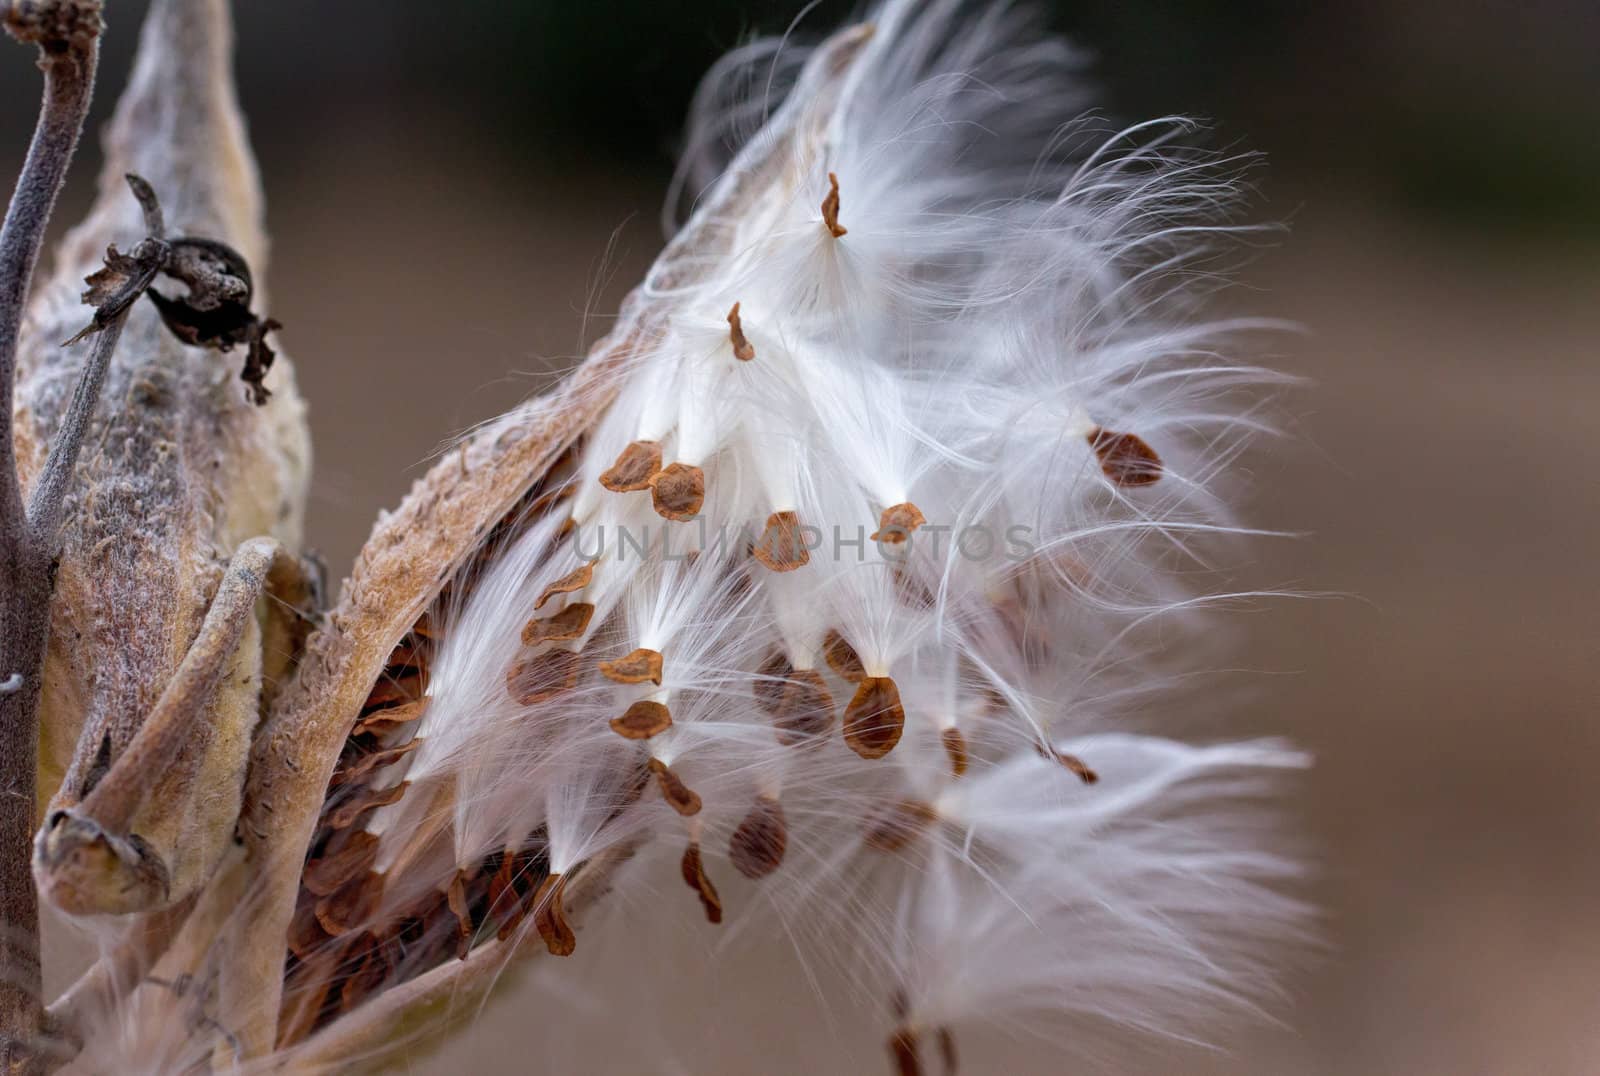 Wind Blown Seeds from Milkweed Plant in Autumn